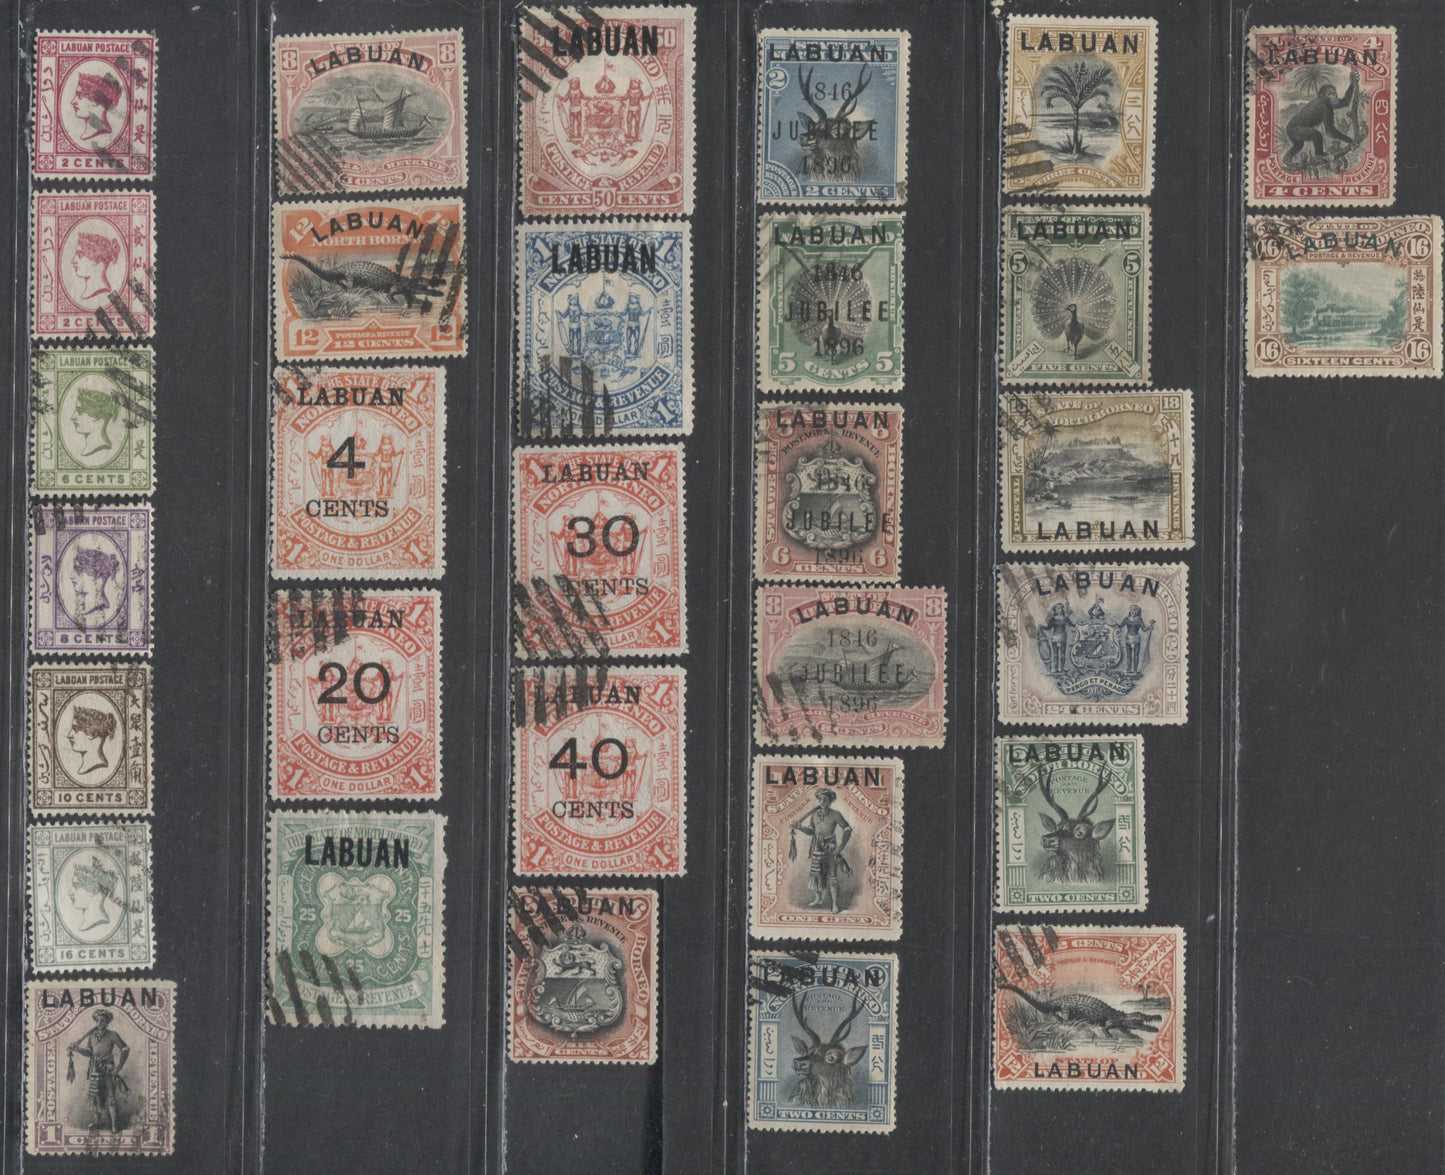 Lot 430 Labuan SC#42/99 1894-1901 Pictorials, Overprints & Surcharges, 21 Fine/Very Fine Used Singles, Click on Listing to See ALL Pictures, 2022 Scott Classic Cat. $30.5 USD